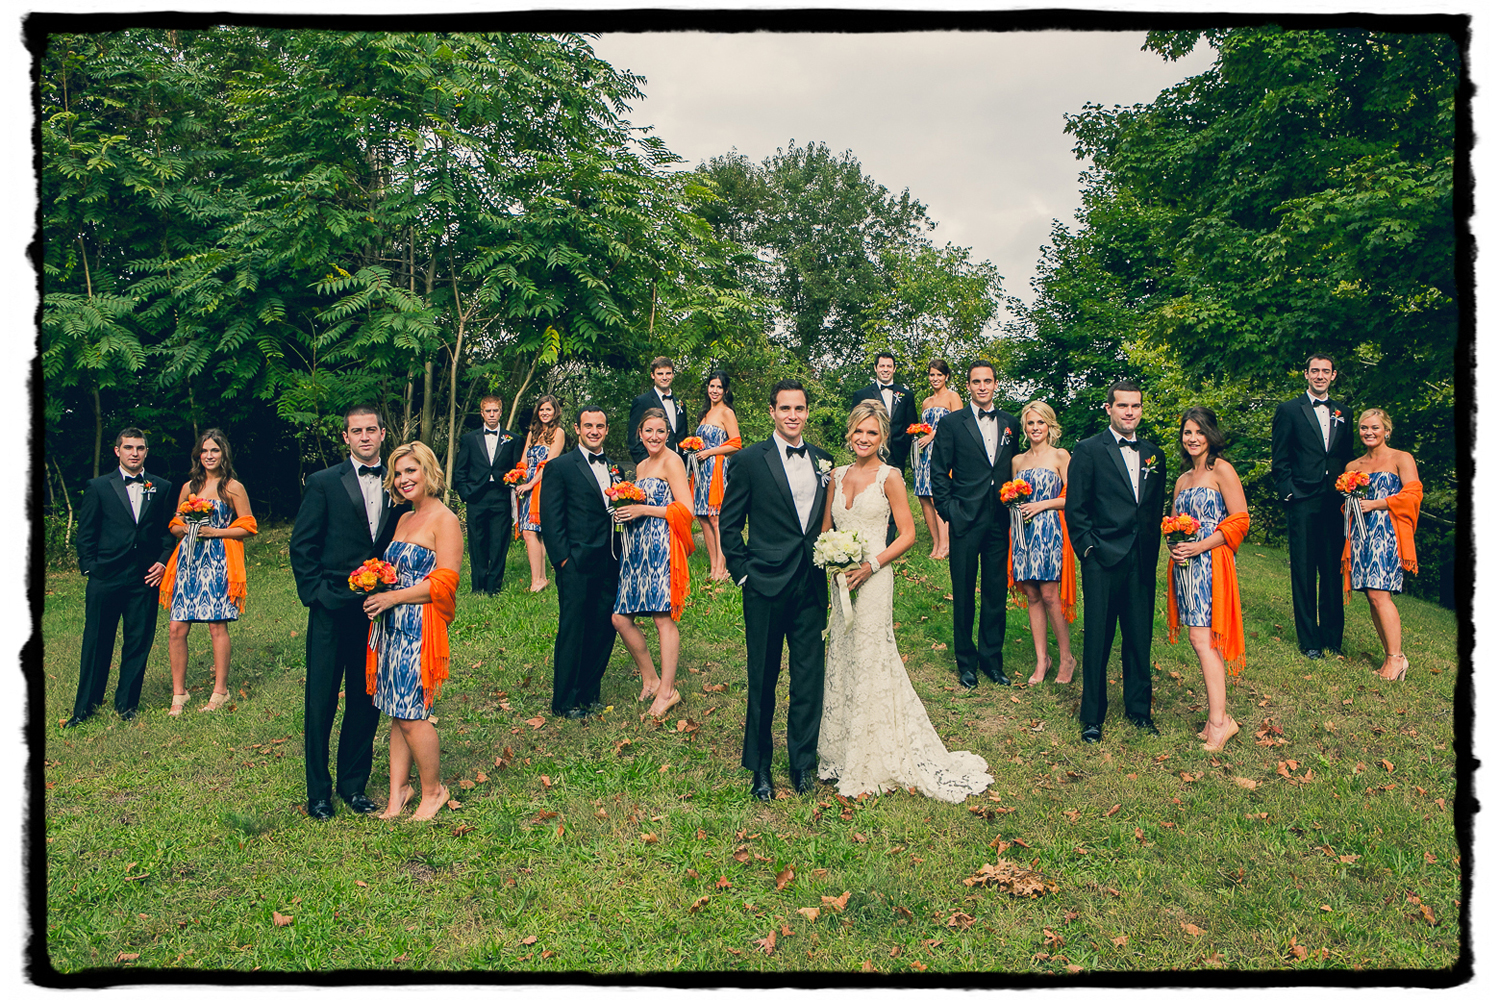 Patterned blue and orange paired with black tuxedos were the order of the day for Devin & Mike's wedding at Belle Haven Club in Greenwich, CT.